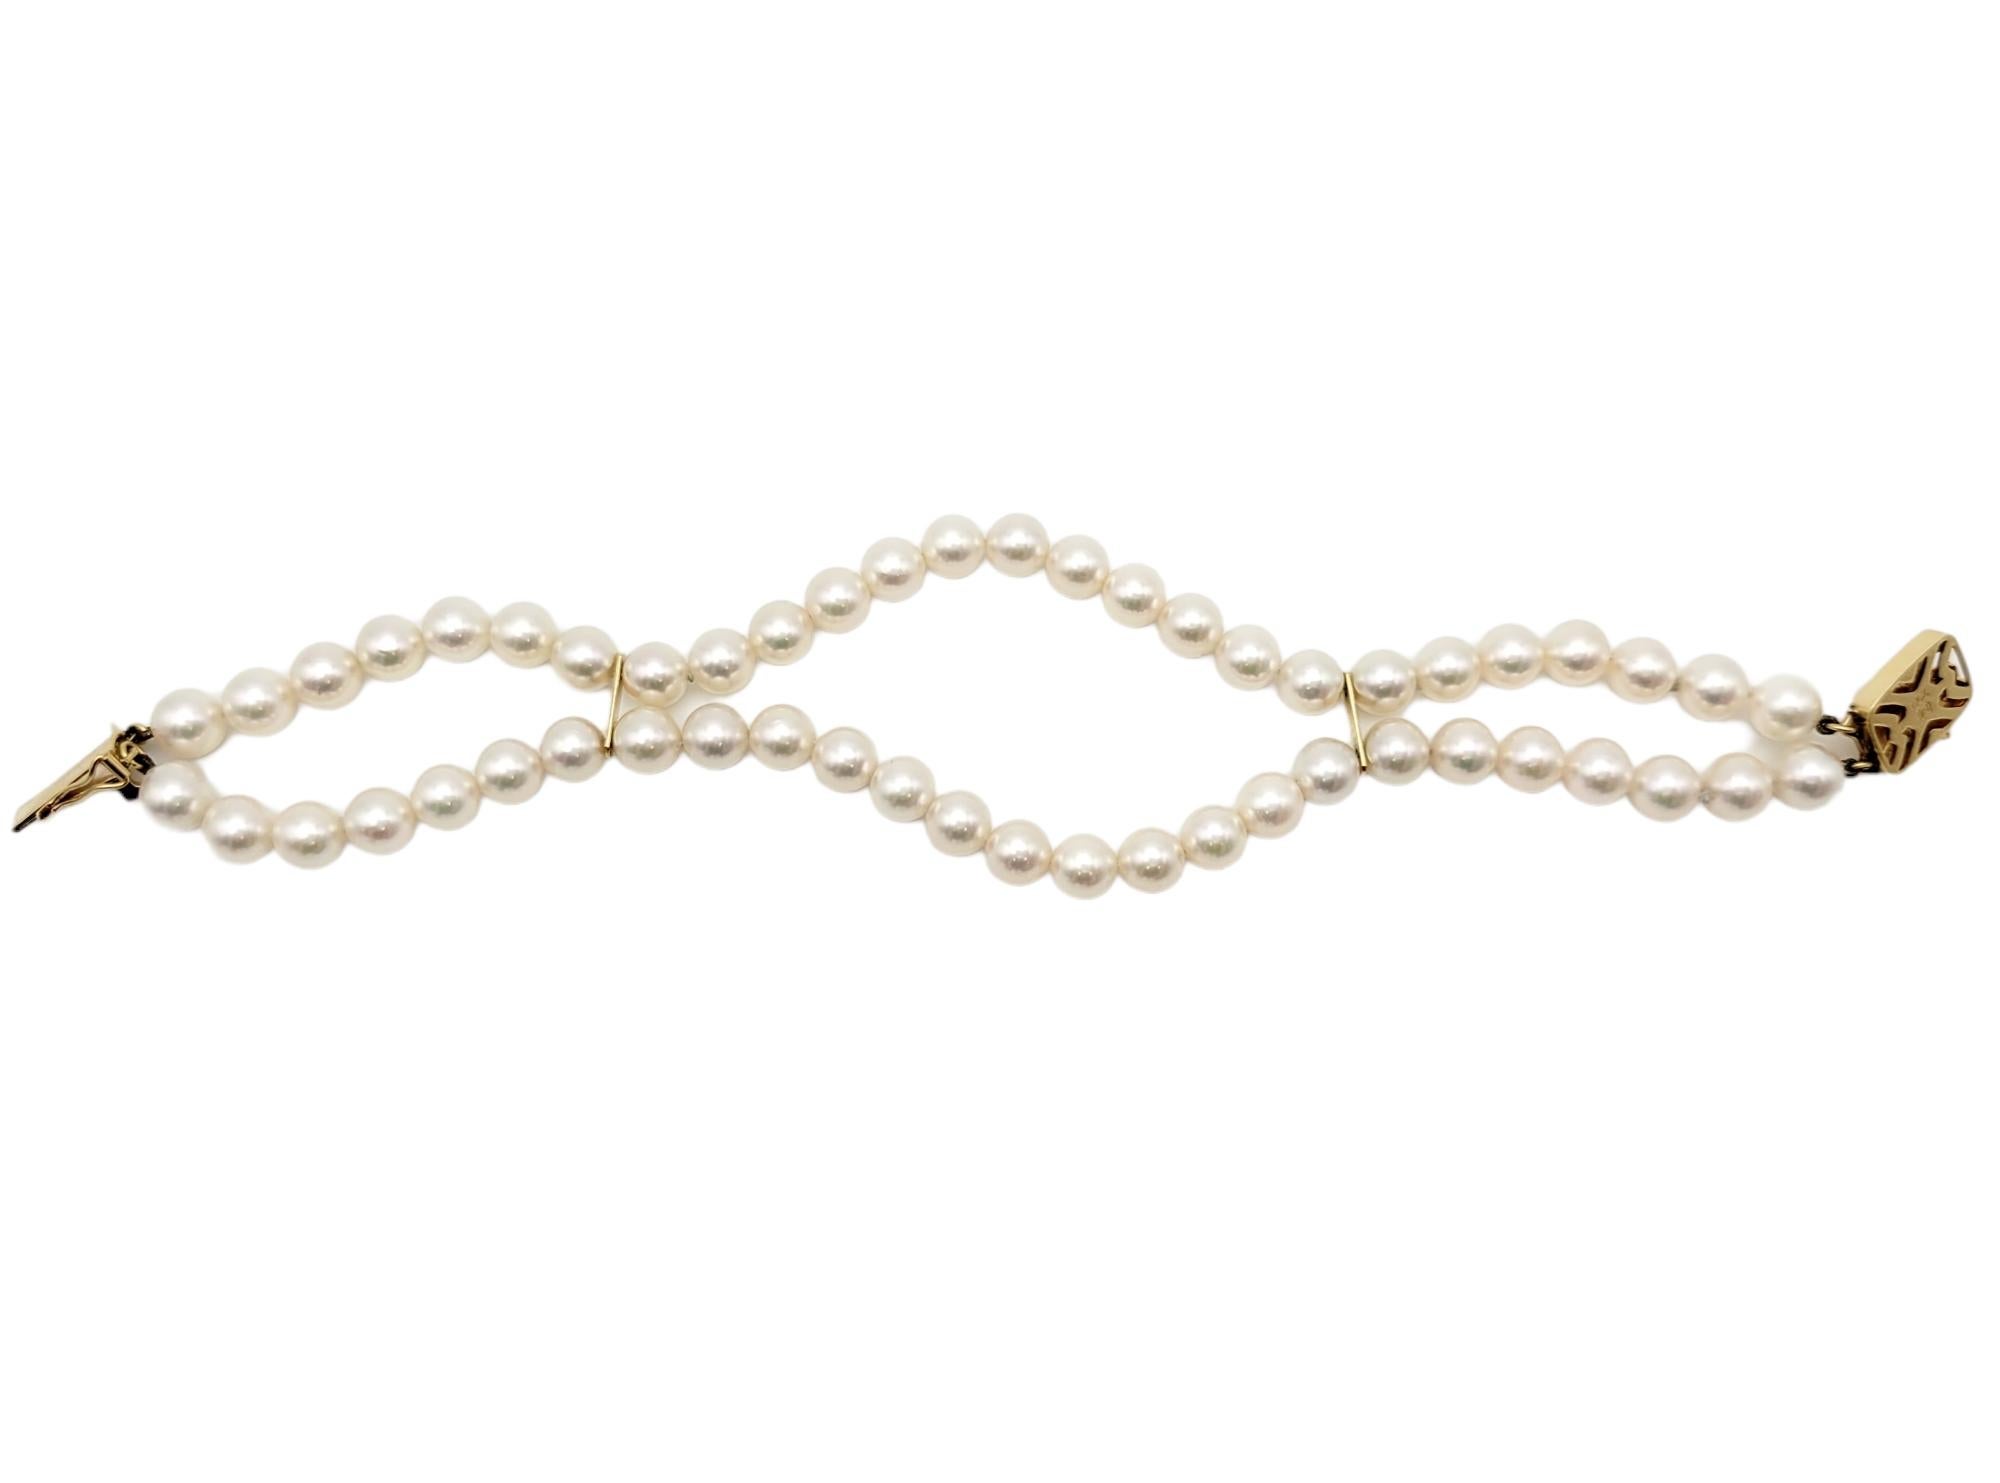 Double Strand Akoya Cultured Pearl Station Bracelet in 18 Karat Yellow Gold In Good Condition For Sale In Scottsdale, AZ